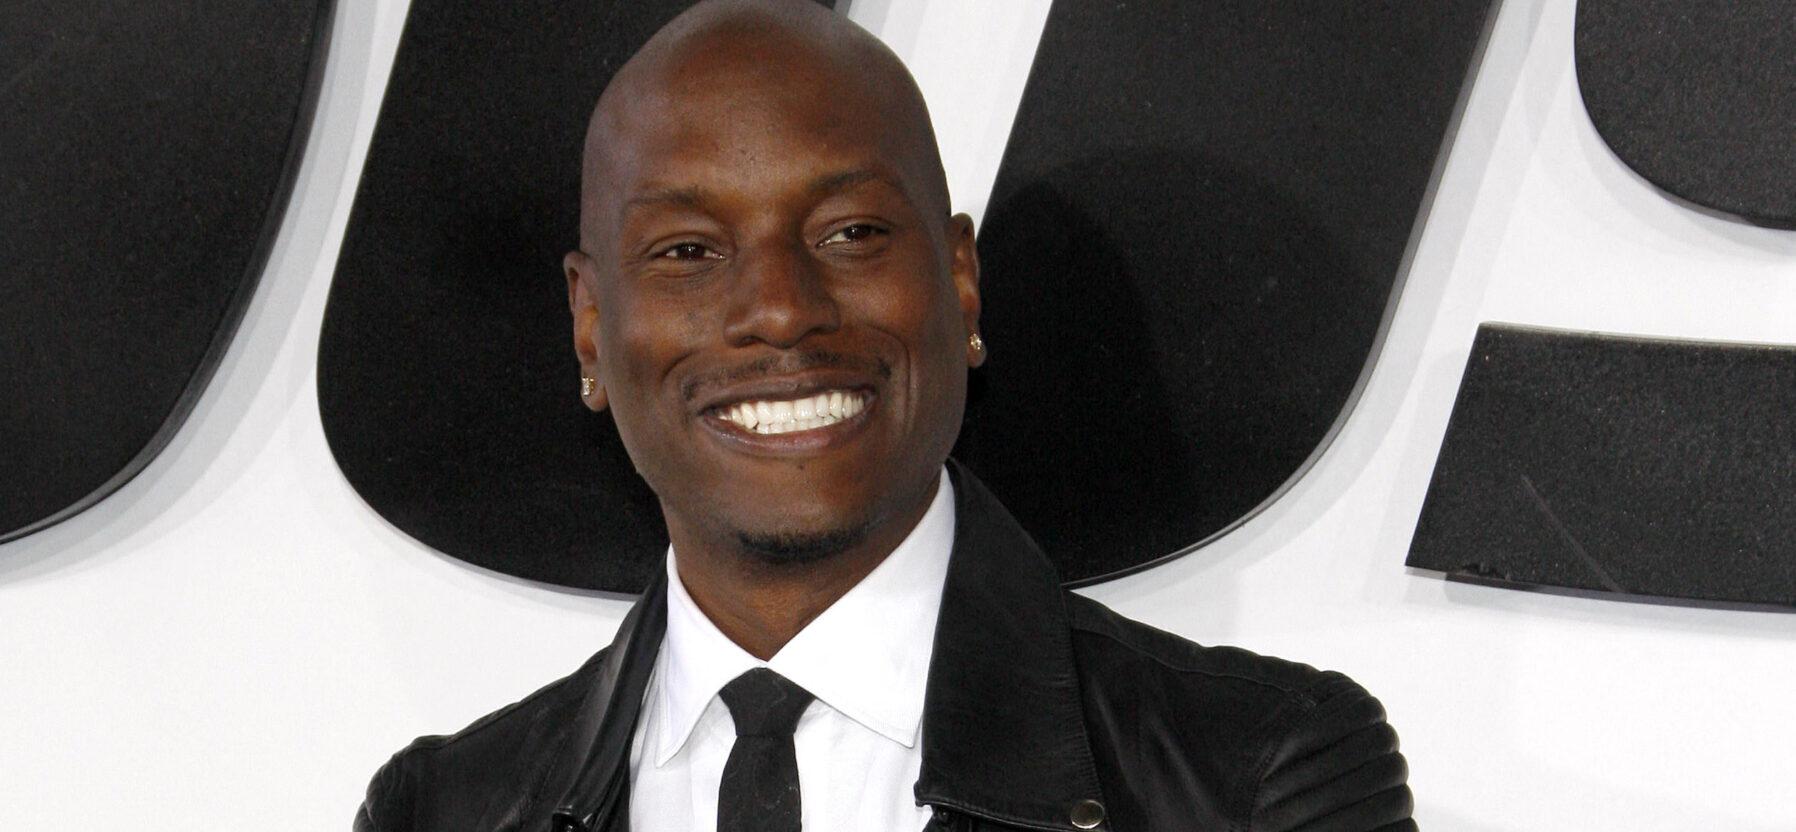 Tyrese Gibson Sued For $10 Million Over ‘Breakfast Club’ Interview